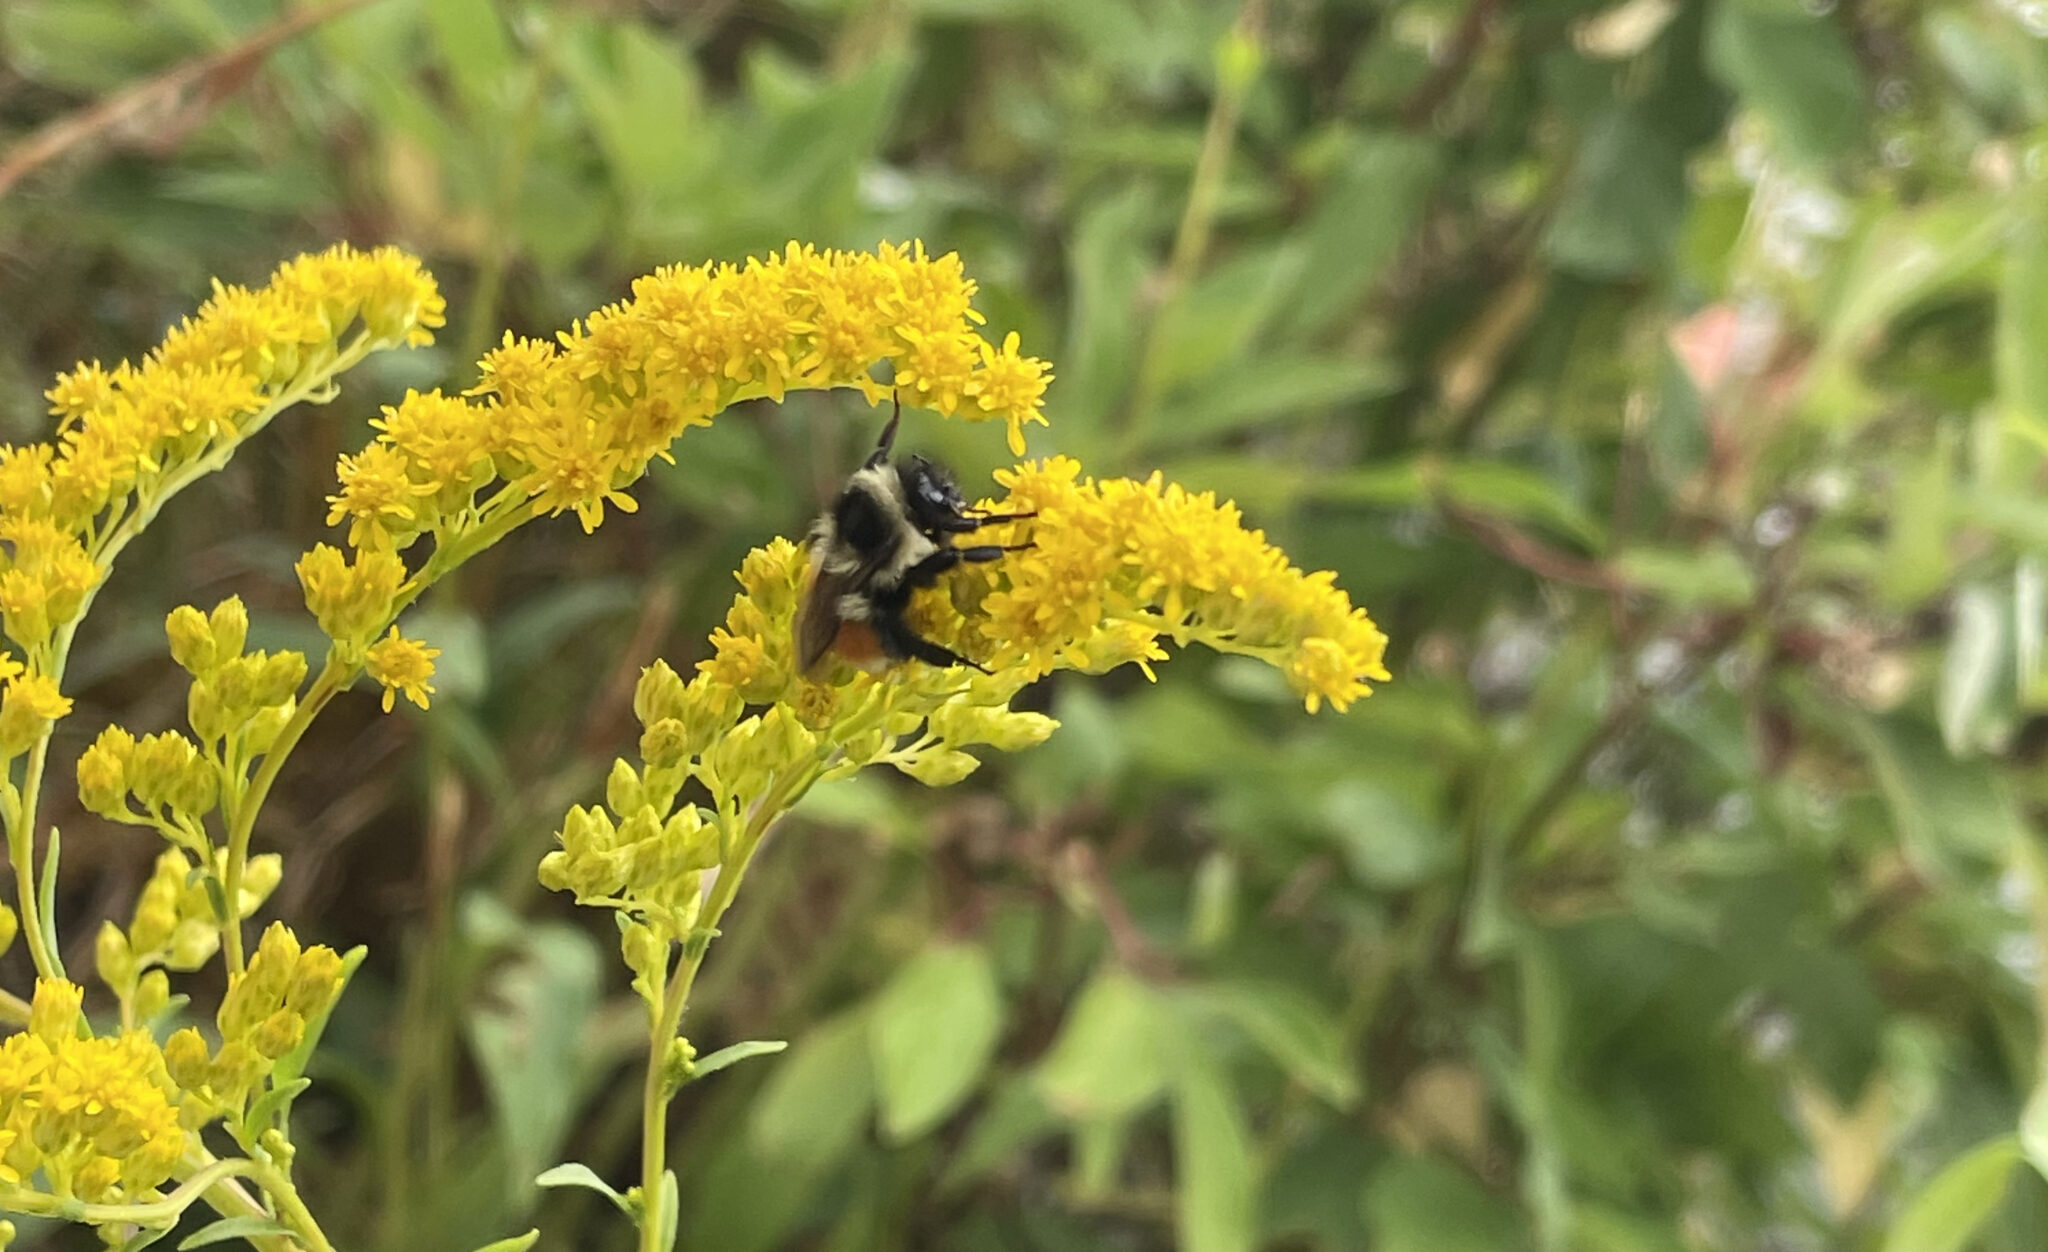 Tricolored bumble bee